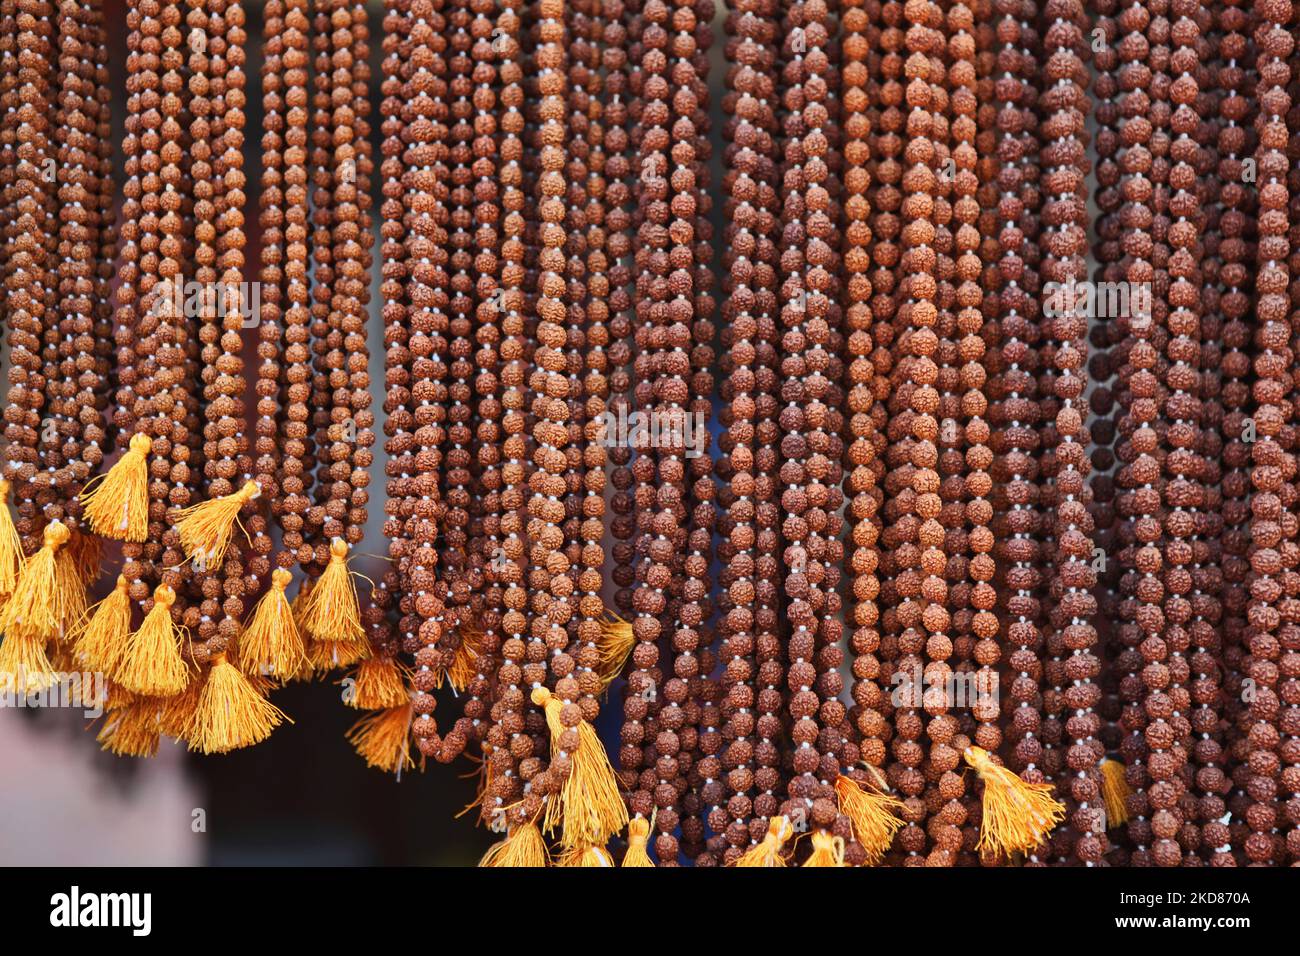 Rudraksh malas for sale at the religious market near Pashpatinath Temple in Kathmandu, Nepal. Rudraksh malas traditionally consist of 108 beads per strand and are used for repetitive prayer in Hinduism, Sikhism and Buddhism. The seeds are used medicinally to treat various diseases in traditional Indian medicine. (Photo by Creative Touch Imaging Ltd./NurPhoto) Stock Photo